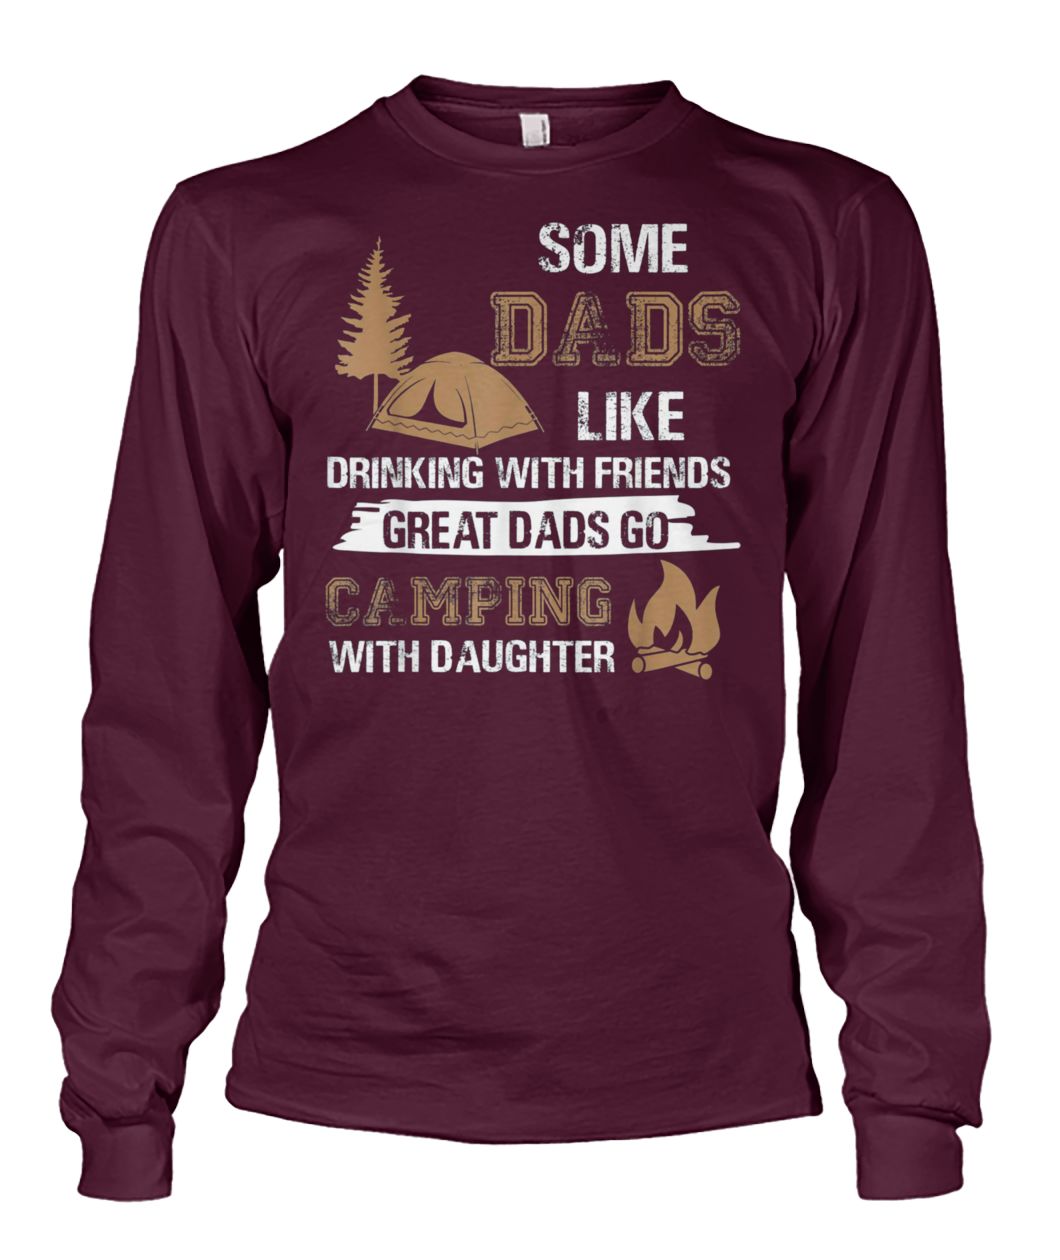 Some dads like drinking with friends great dads go camping with daughter unisex long sleeve